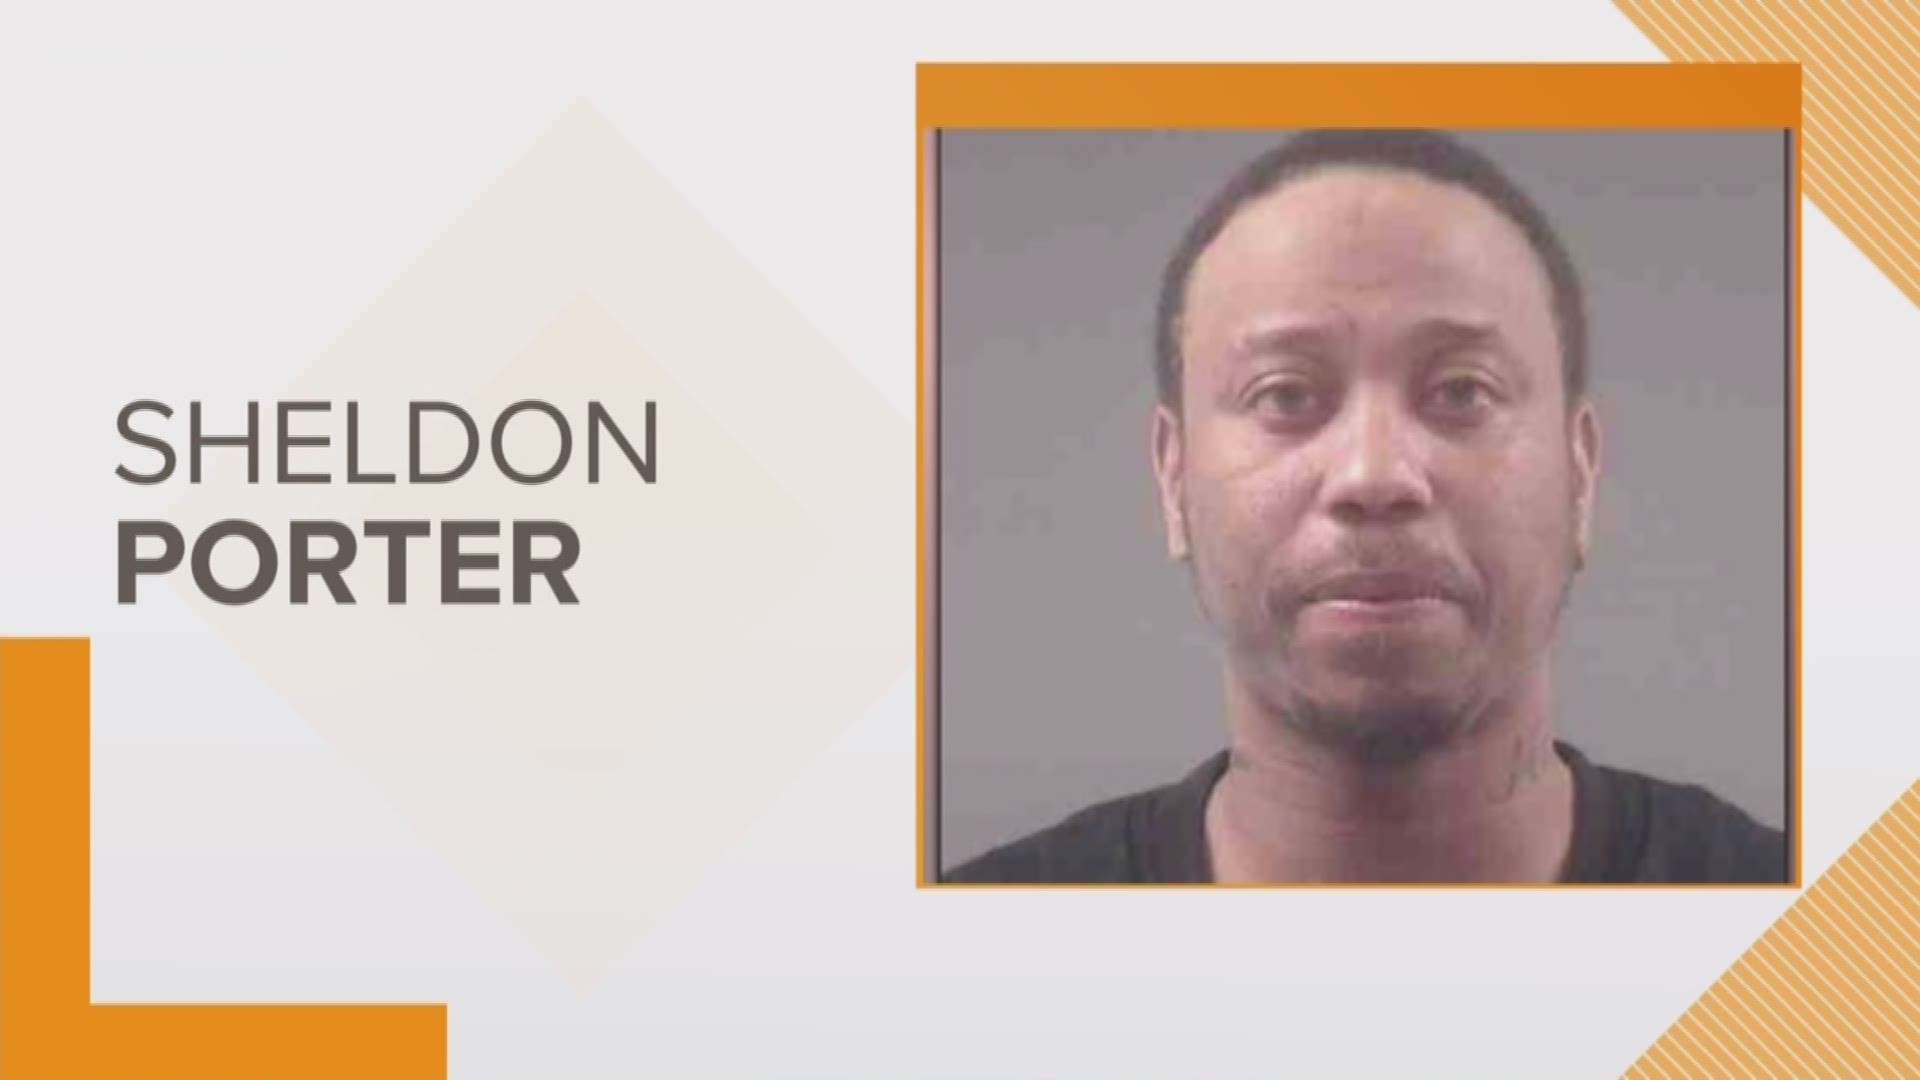 Sheldon Porter is accused of killing Wilbur Giles and Chiquita Giles on March 16.